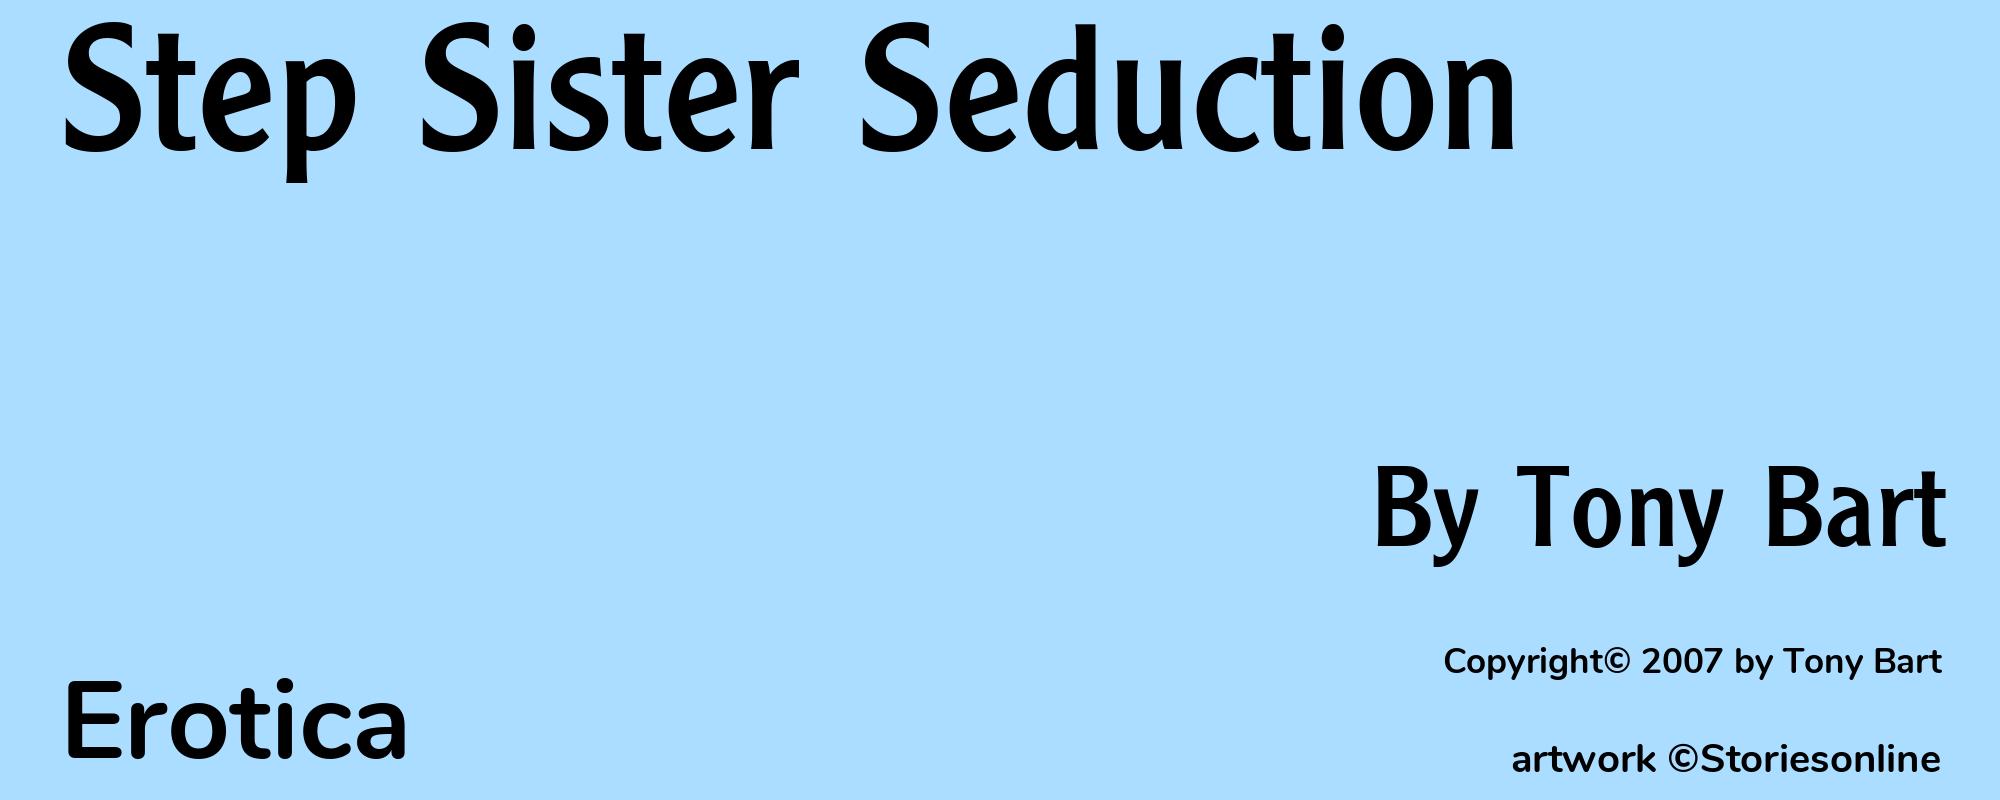 Step Sister Seduction - Cover